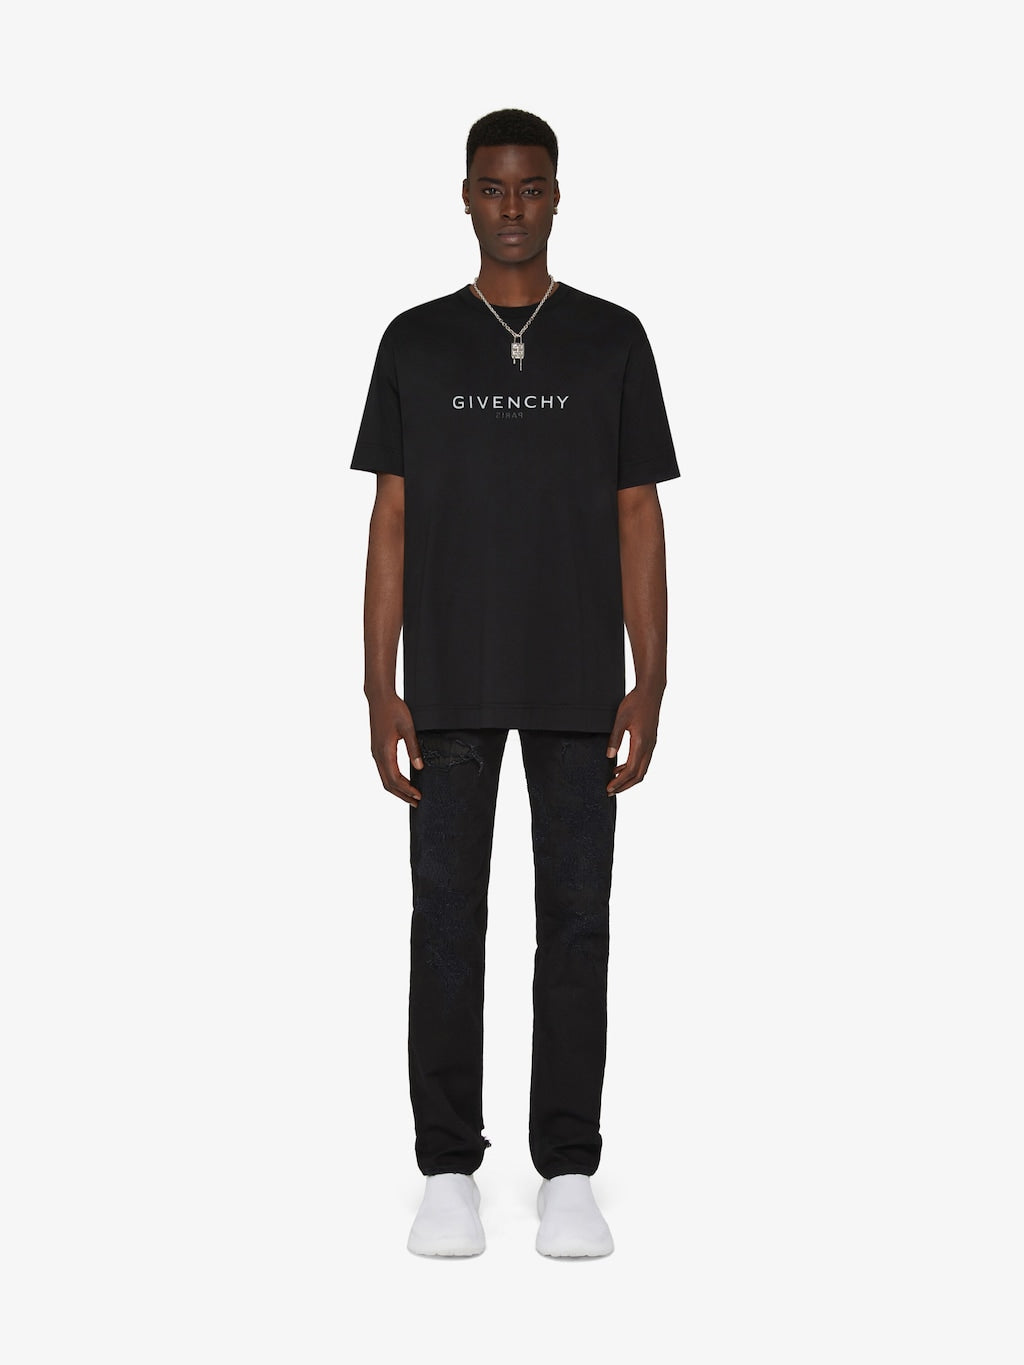 Givenchy Reverse Oversized T-shirt | Hype Vault Kuala Lumpur | Asia's Top Trusted High-End Sneakers and Streetwear Store